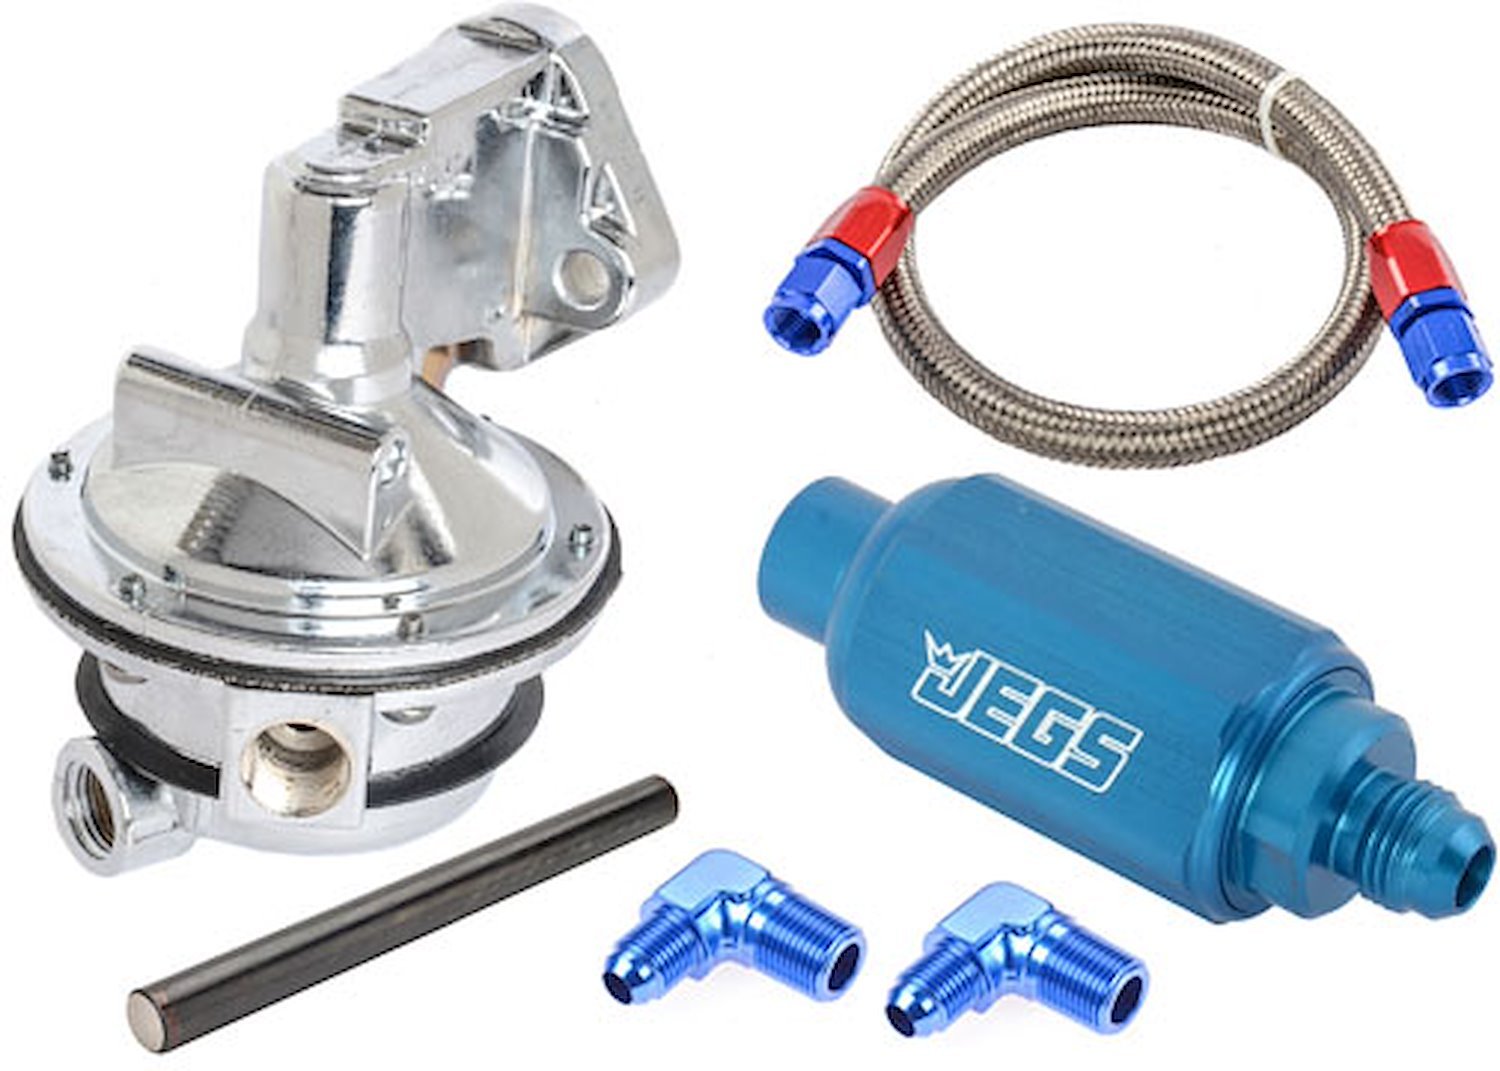 Mechanical Fuel Pump & Installation Kit for Big Block Chevy 396-427-454 [110 gph, Blue Fittings]